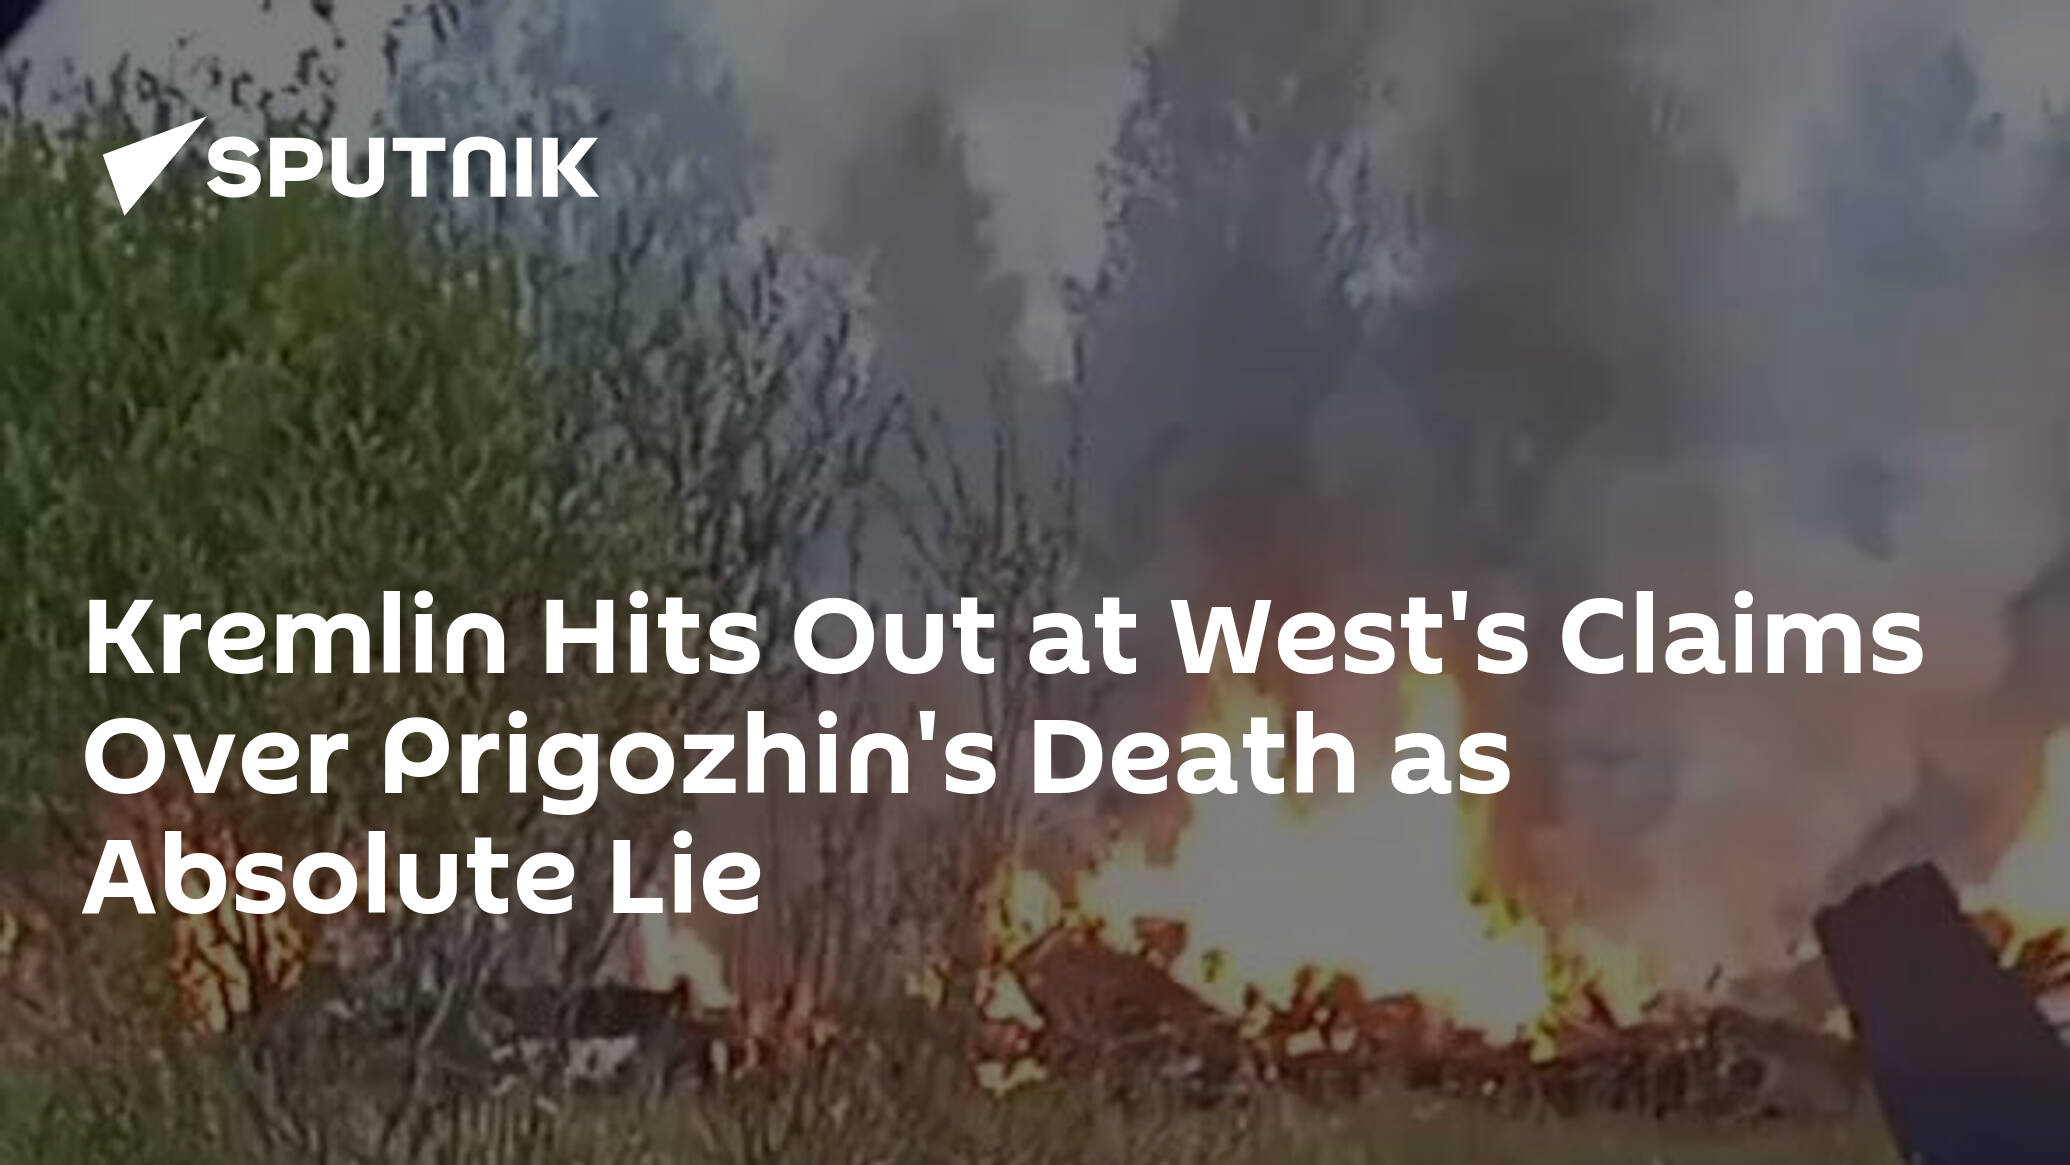 Kremlin Hits Out at West's Claims Over Prigozhin's Death as Absolute Lie